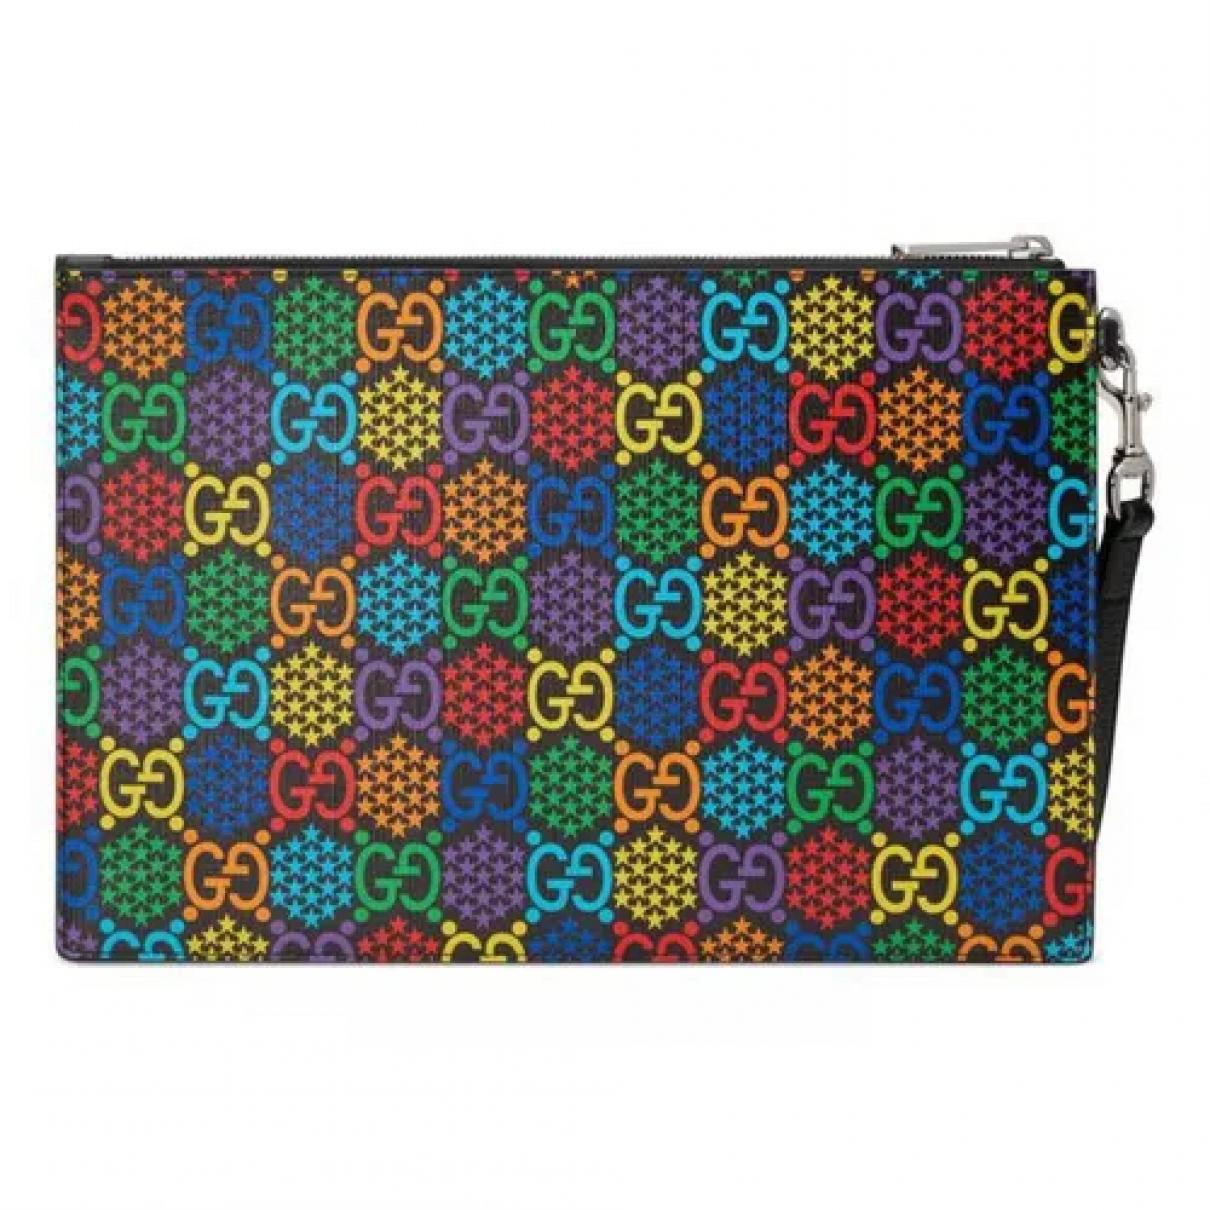 Ophidia leather clutch bag - 5